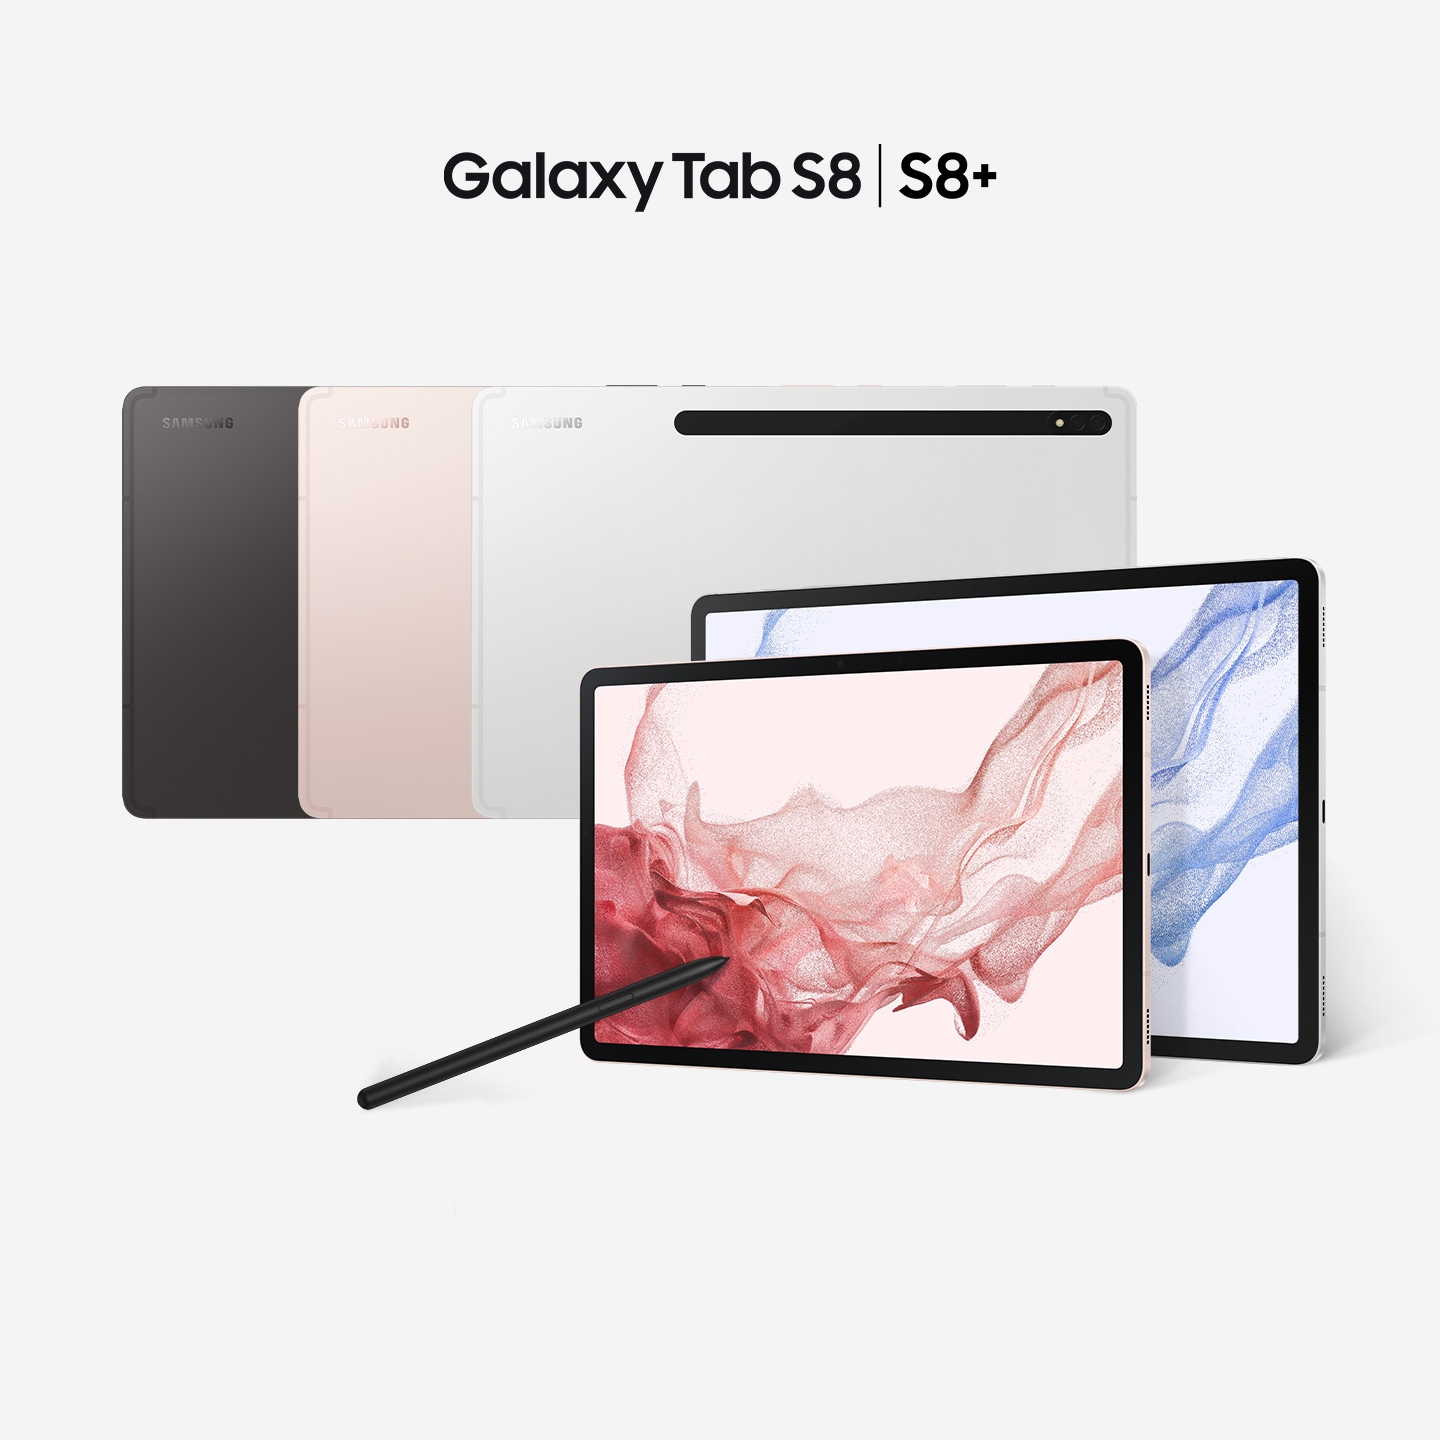 Buy New Galaxy Tab S8, S8+ & S8 Ultra - Price & Offers